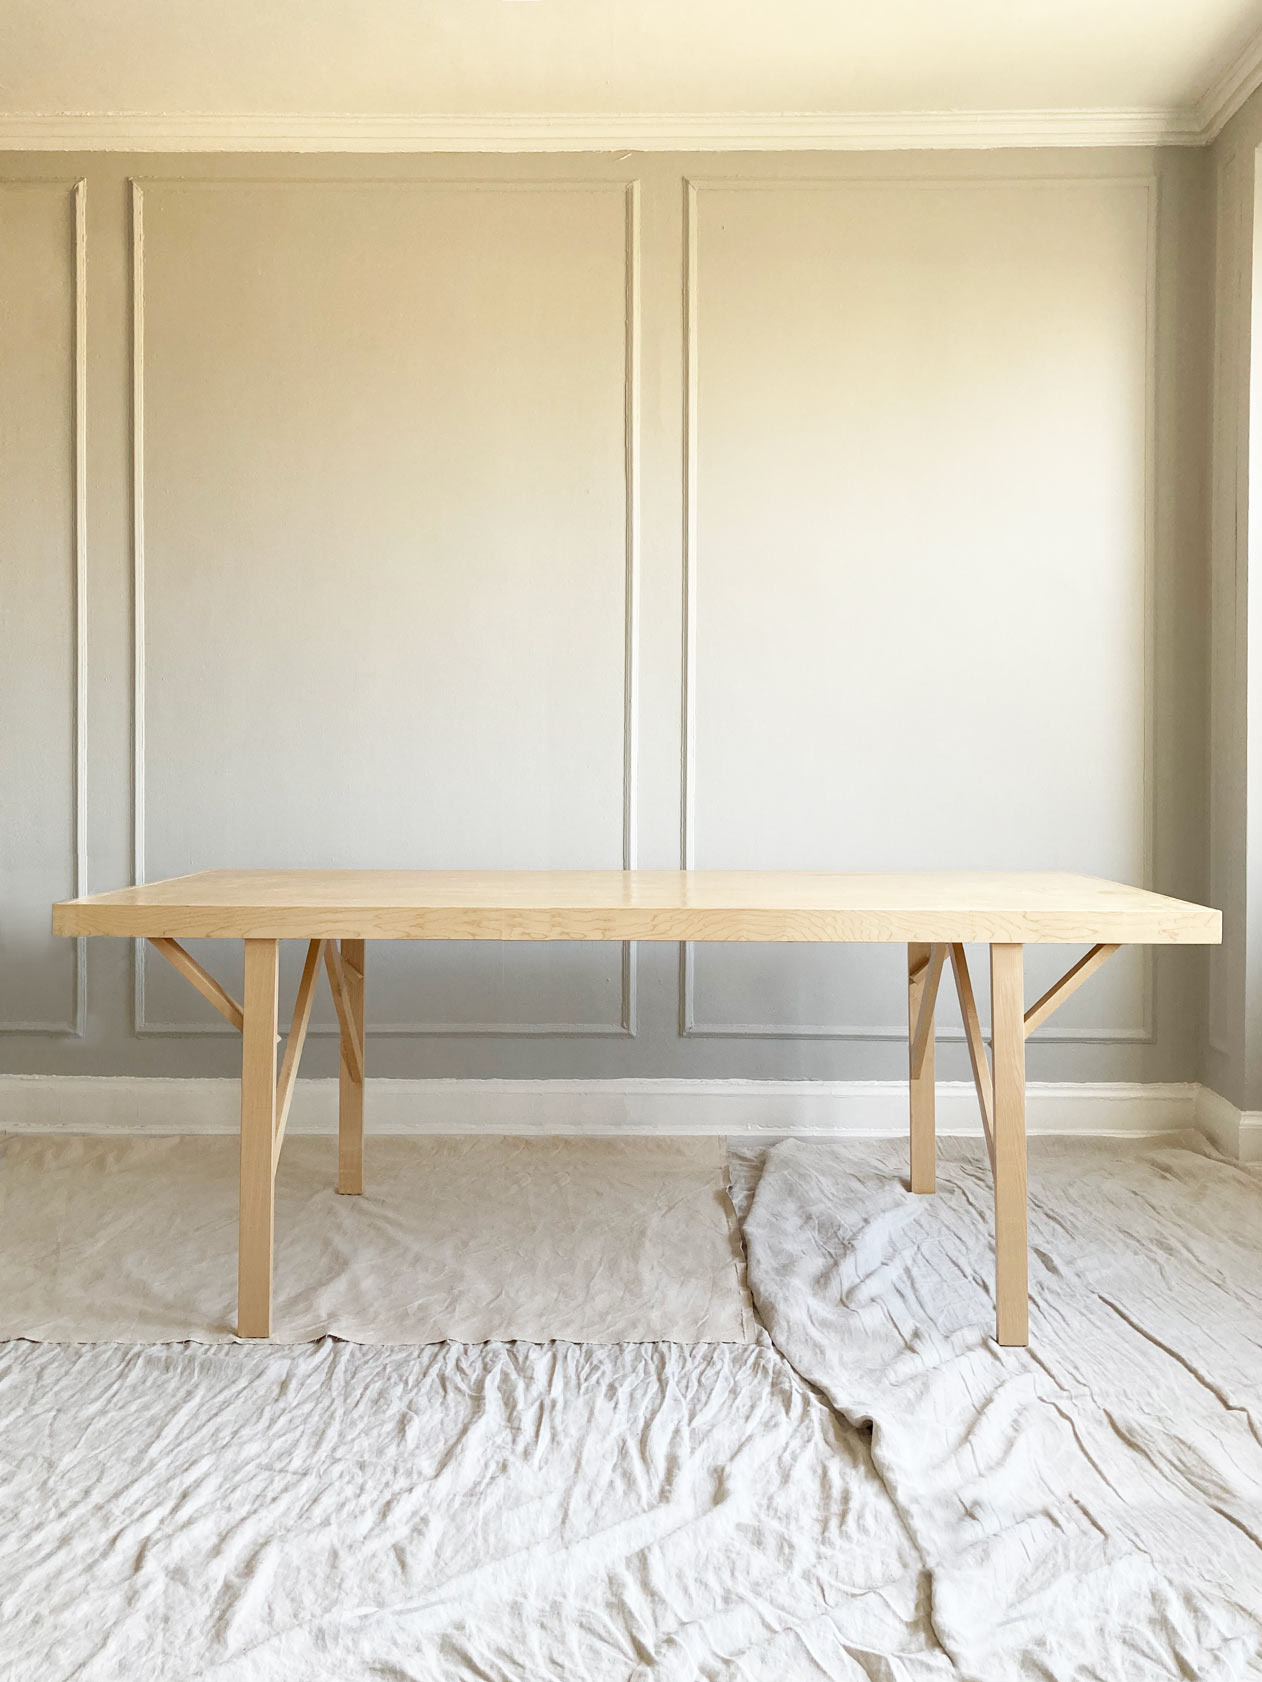 Simple Joinery Dining Table by Ian Anderson